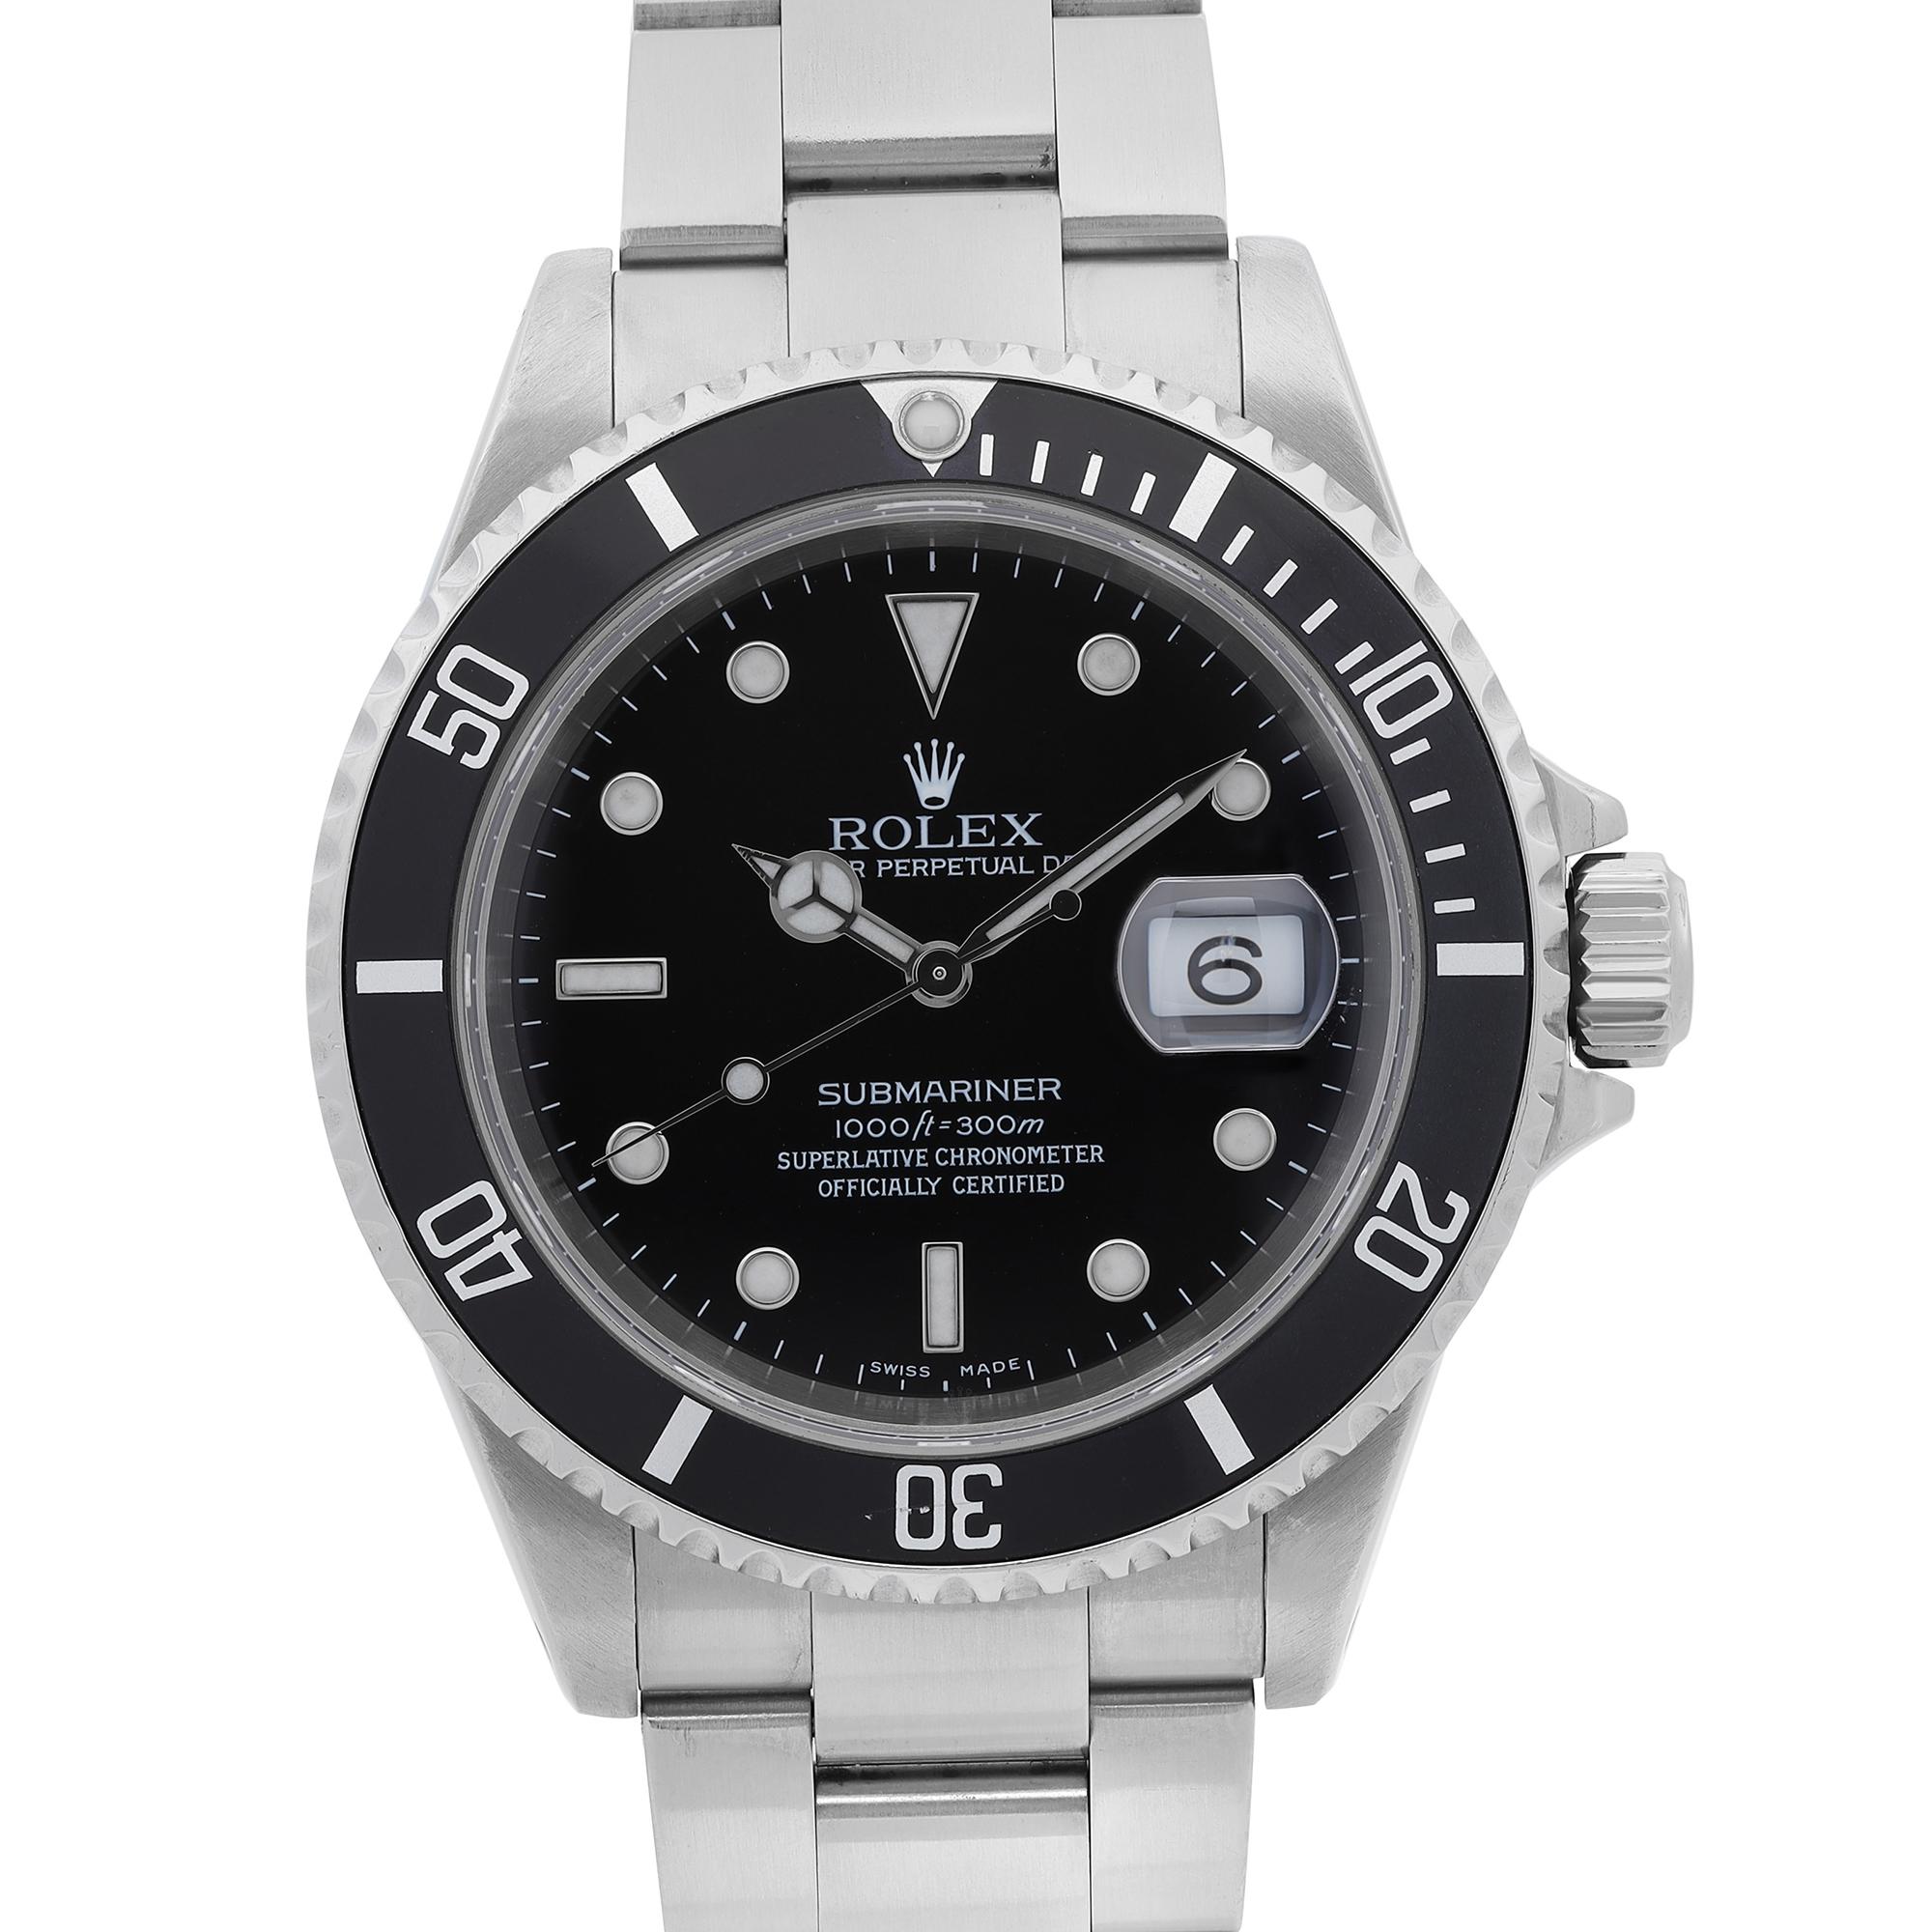 Pre-owned. Wrist Fit: 7.5 inches. Recently Serviced.

Brand: Rolex  Department: Women  Model Number: 16610  Country/Region of Manufacture: Switzerland  Model: Rolex Submariner 16610  Style: Luxury  Band Color: Steel  Dial Color: Black  Case Color: